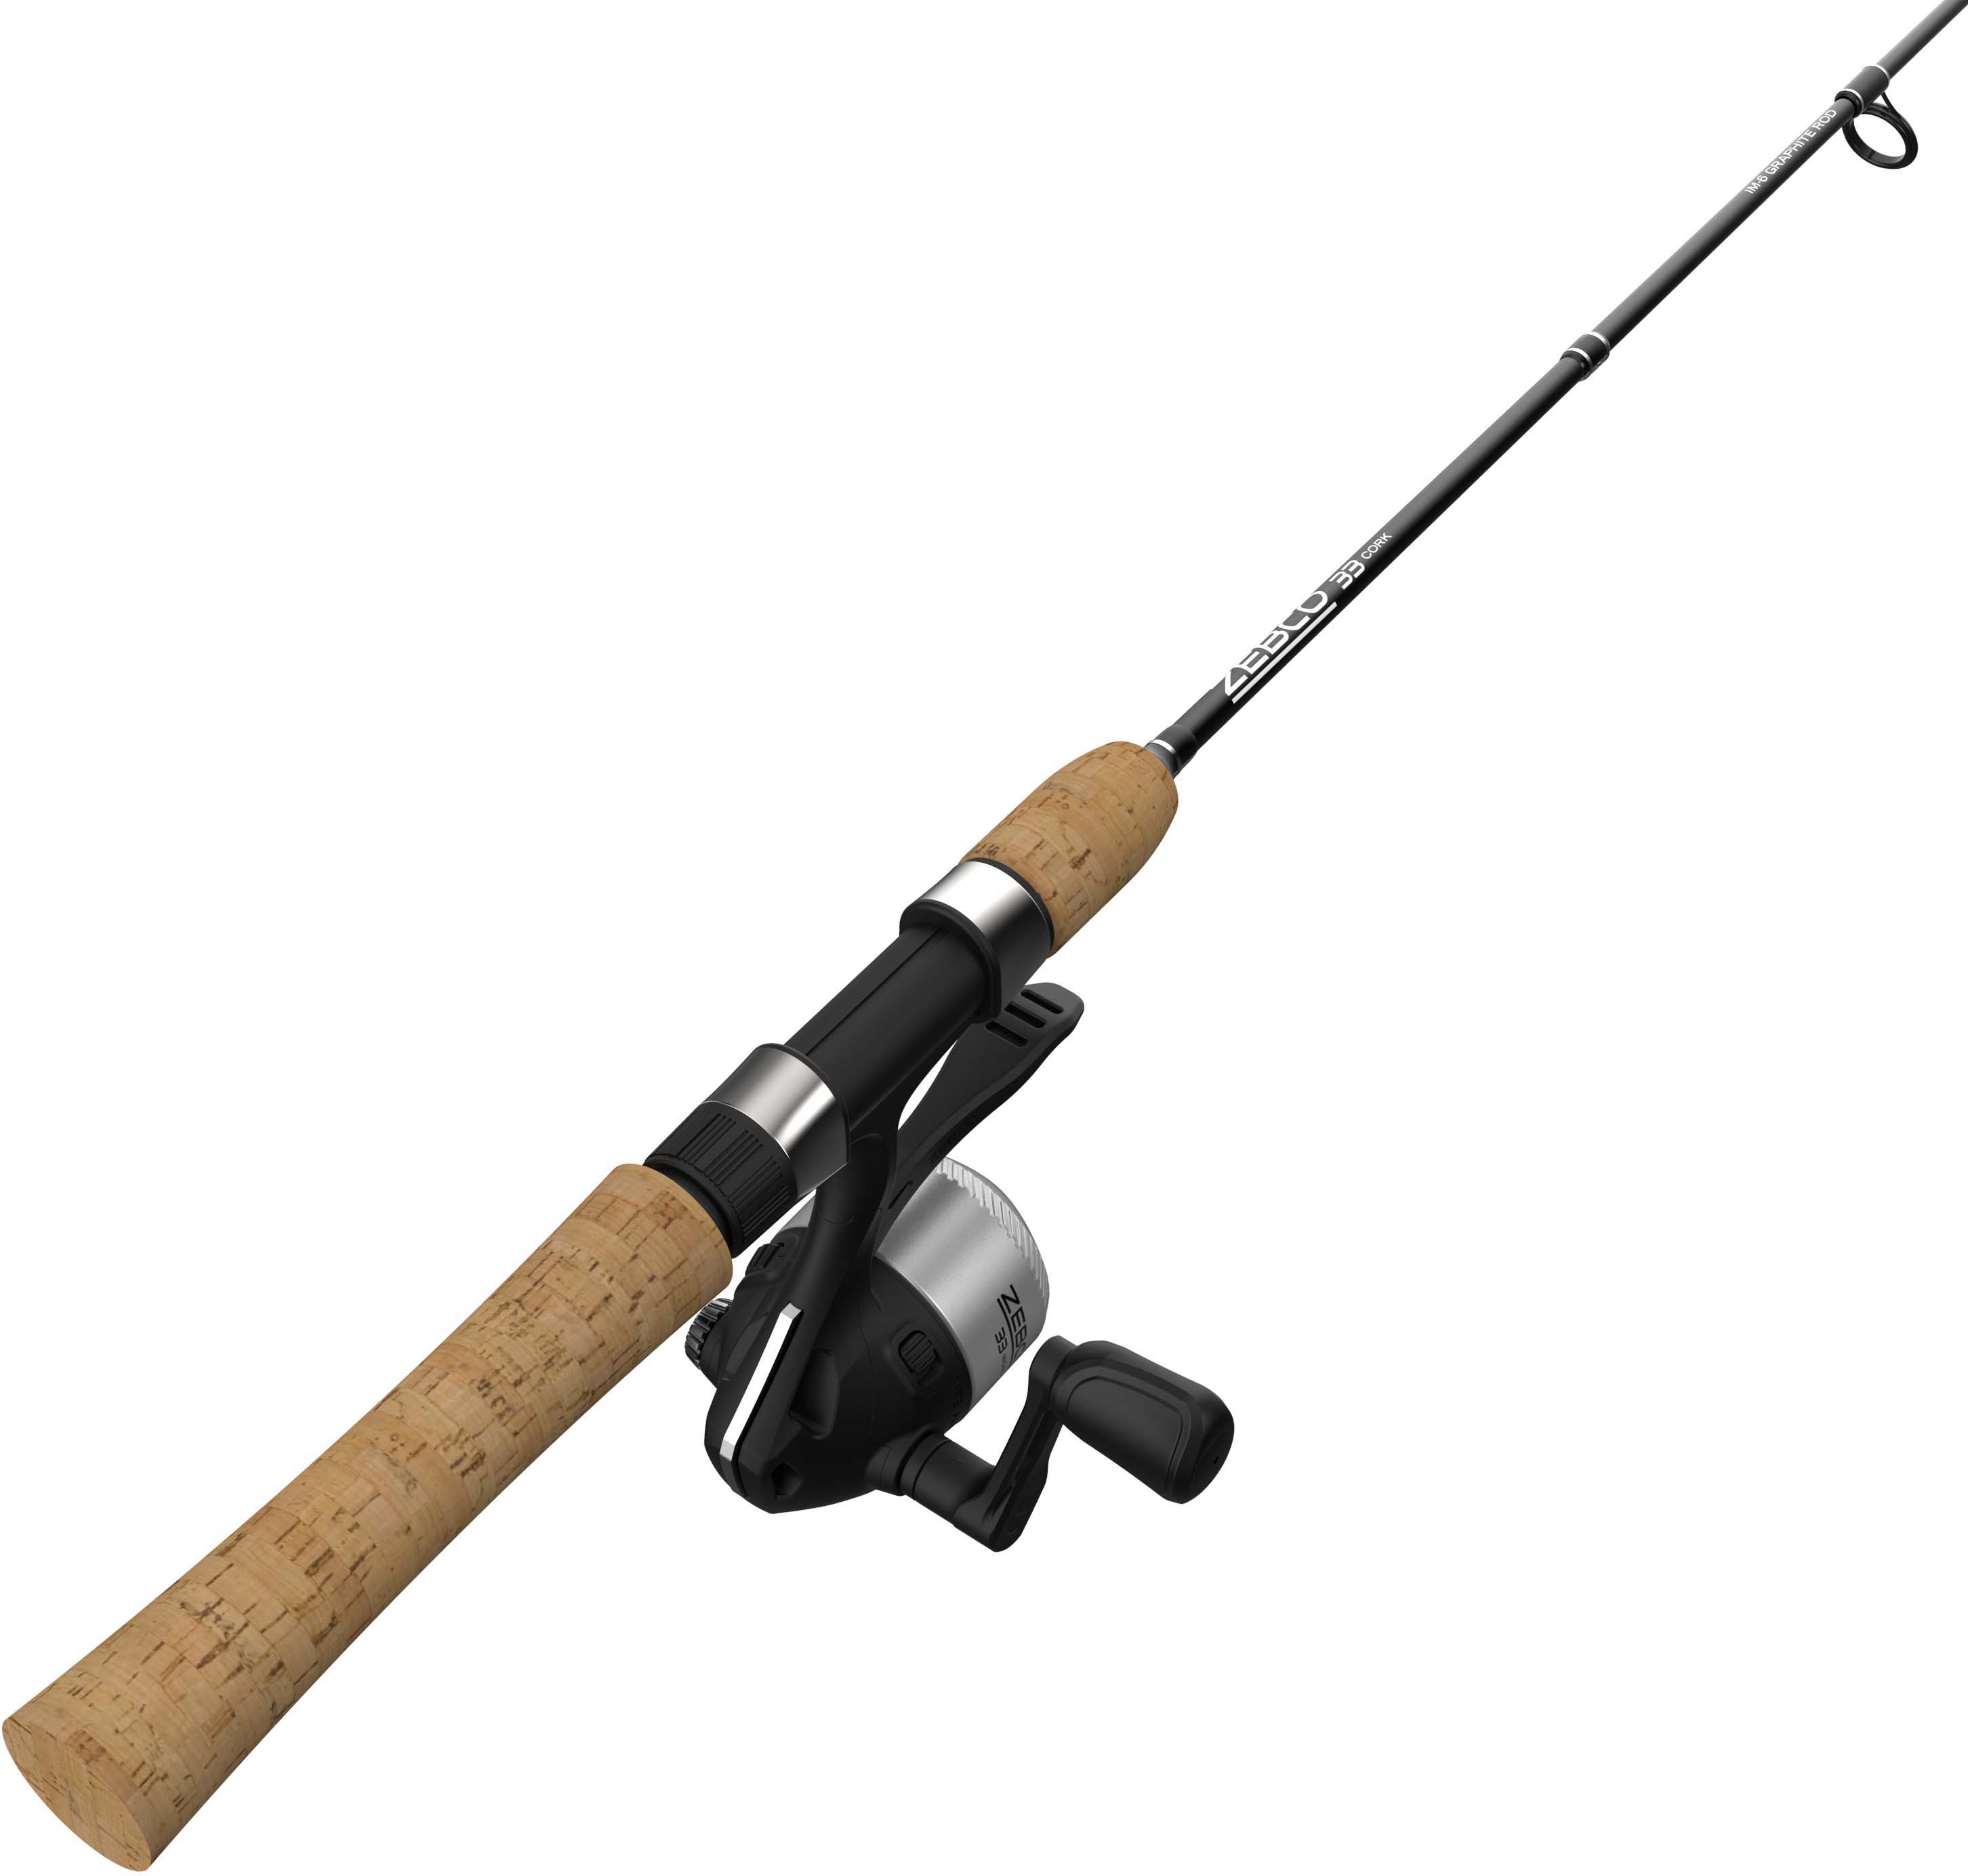 33MAX Spincast Rod and Reel Combo